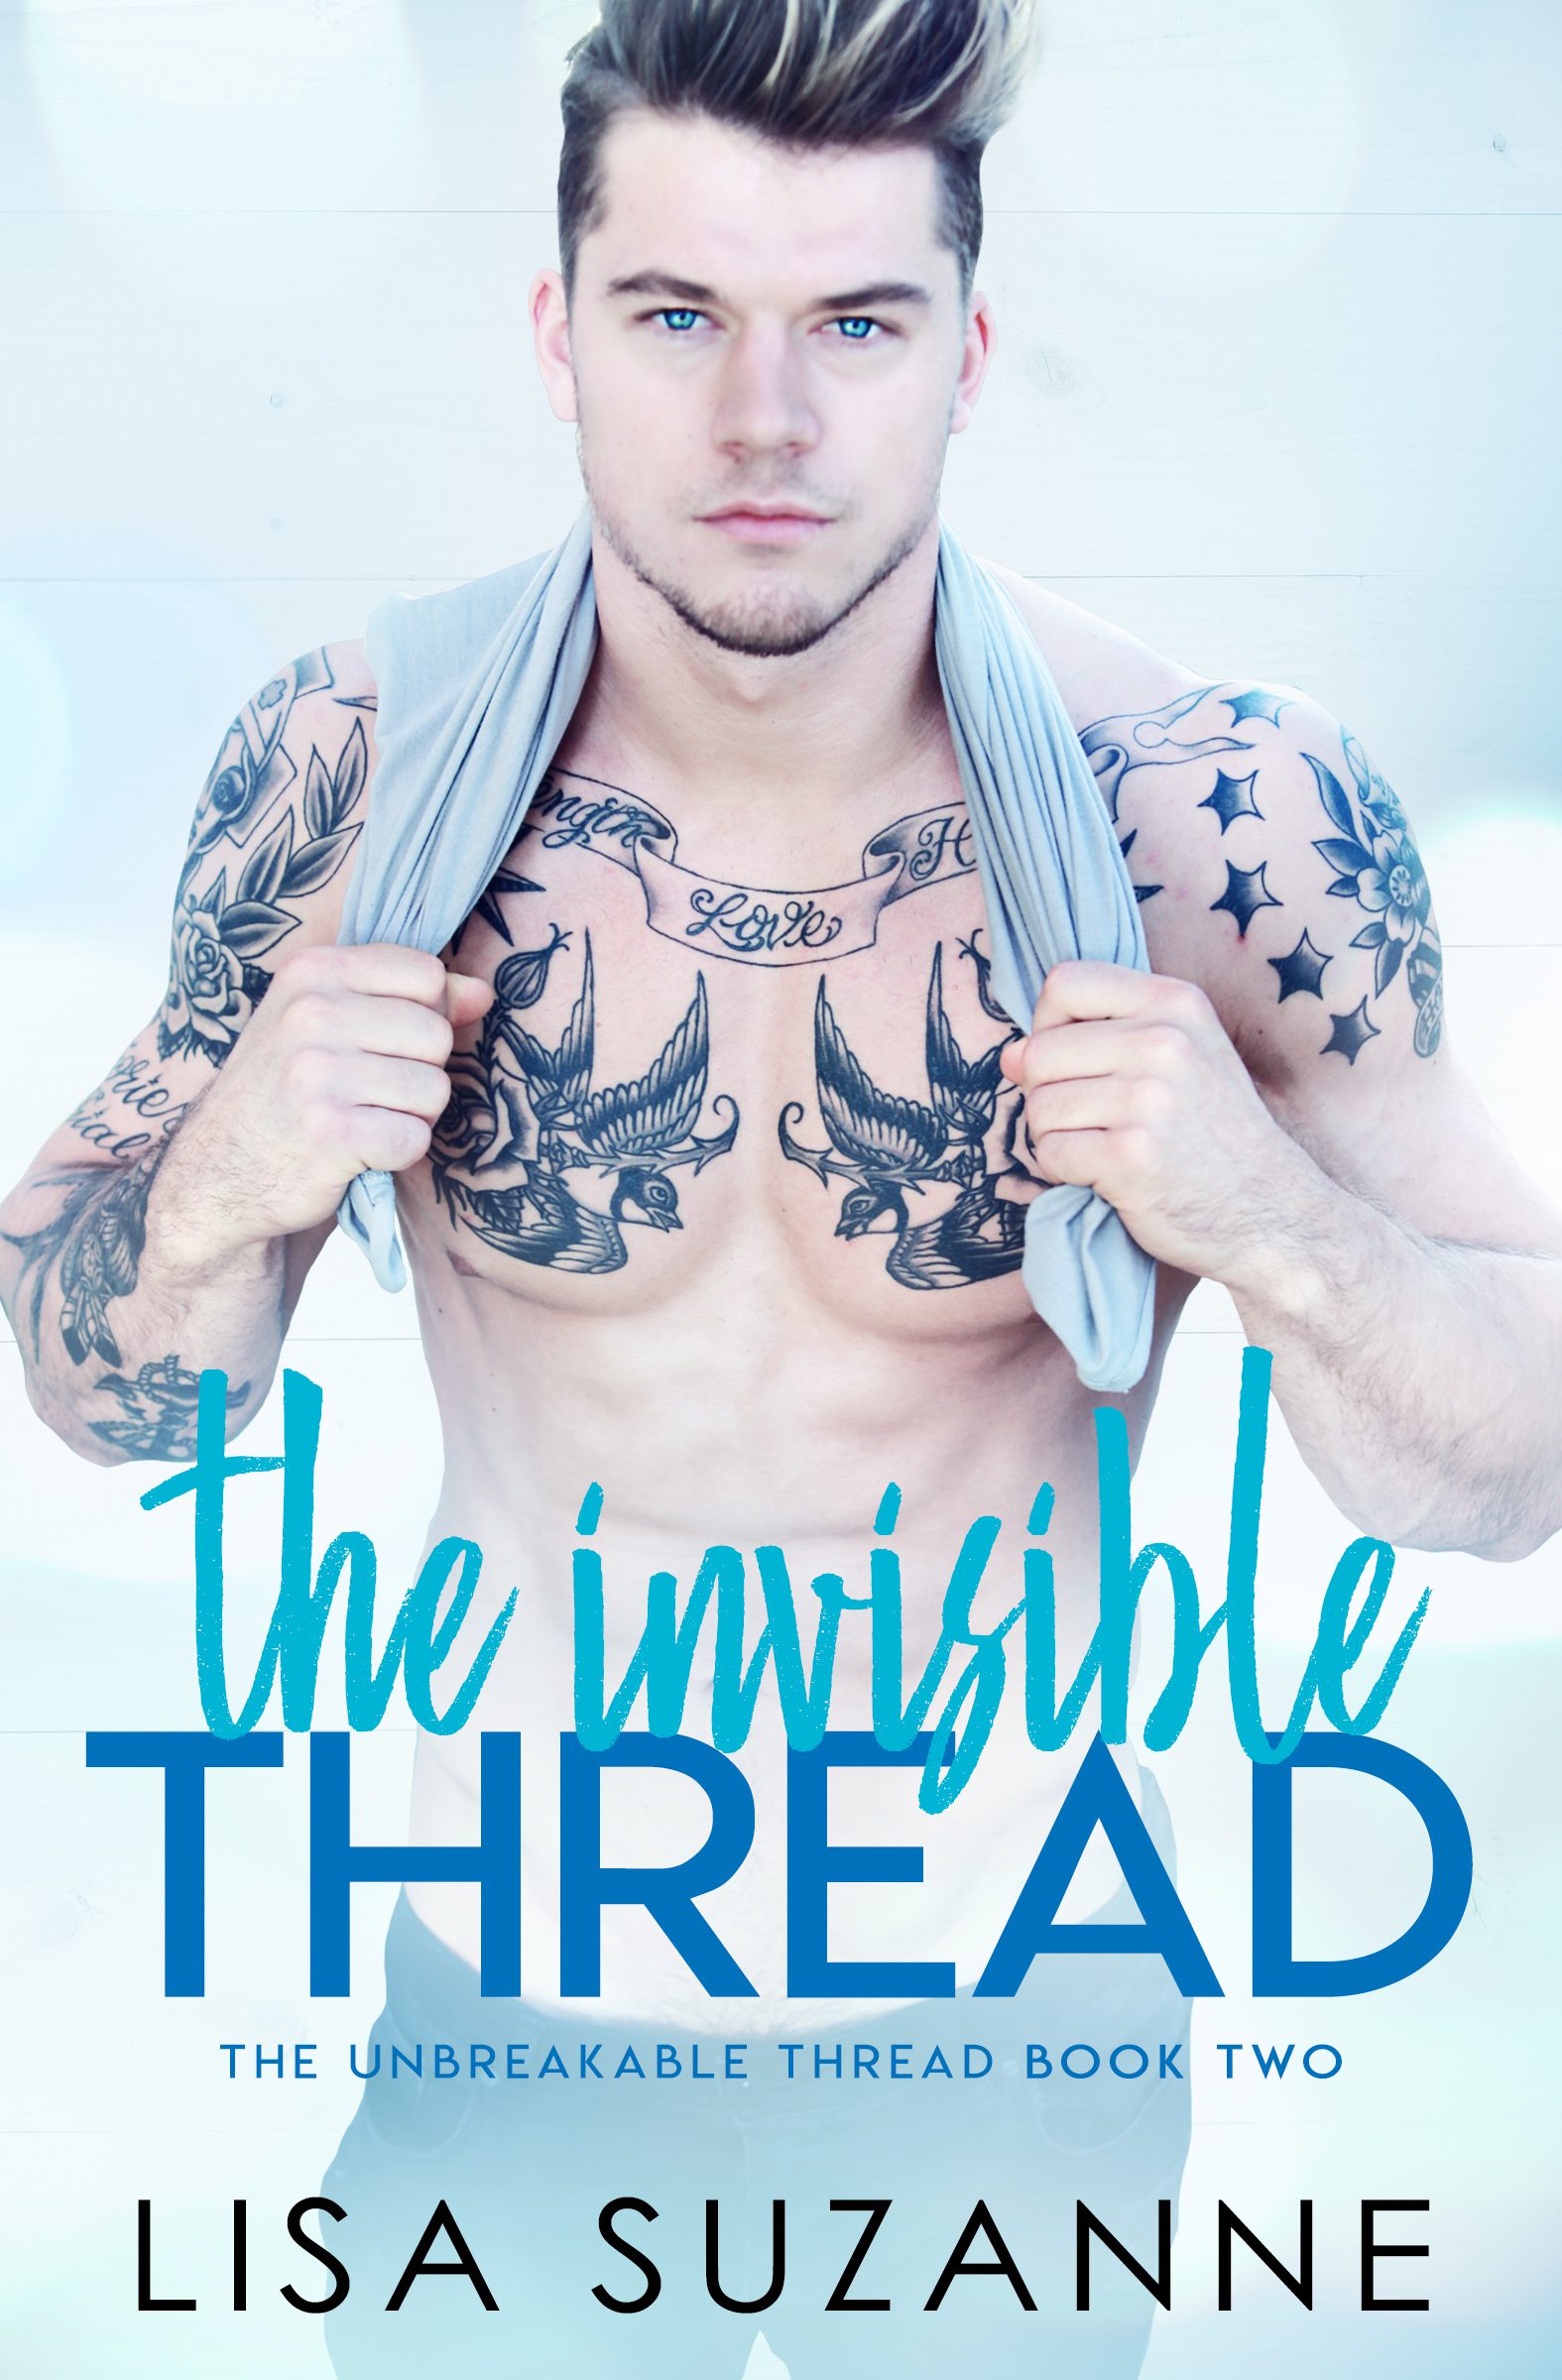 THE INVISIBLE THREAD – LISA SUZANNE